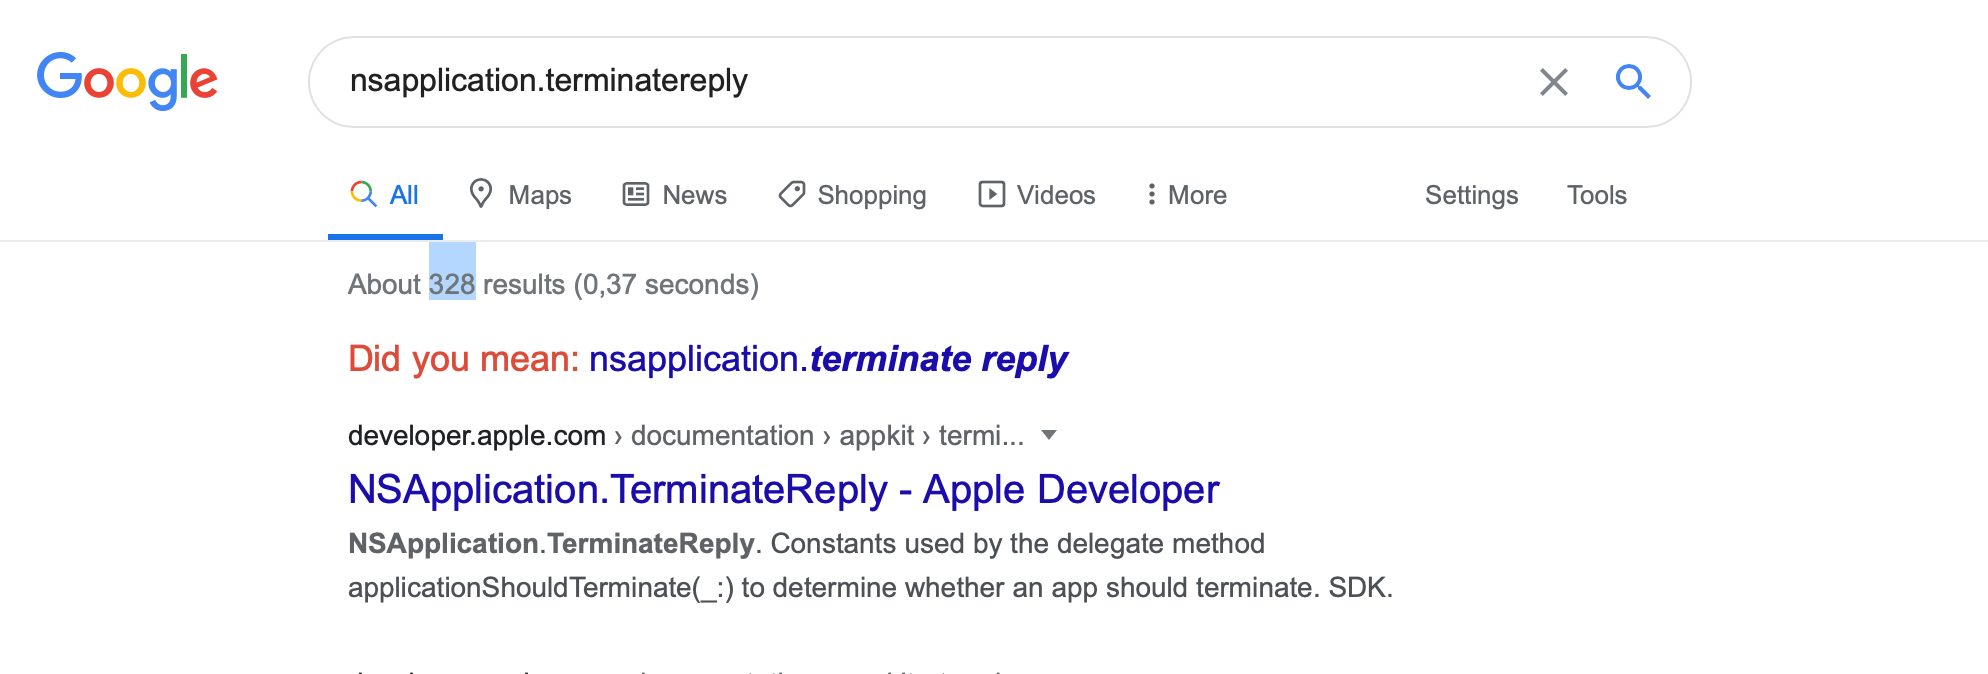 An image showing a google search for NSApplication.TerminateReply.